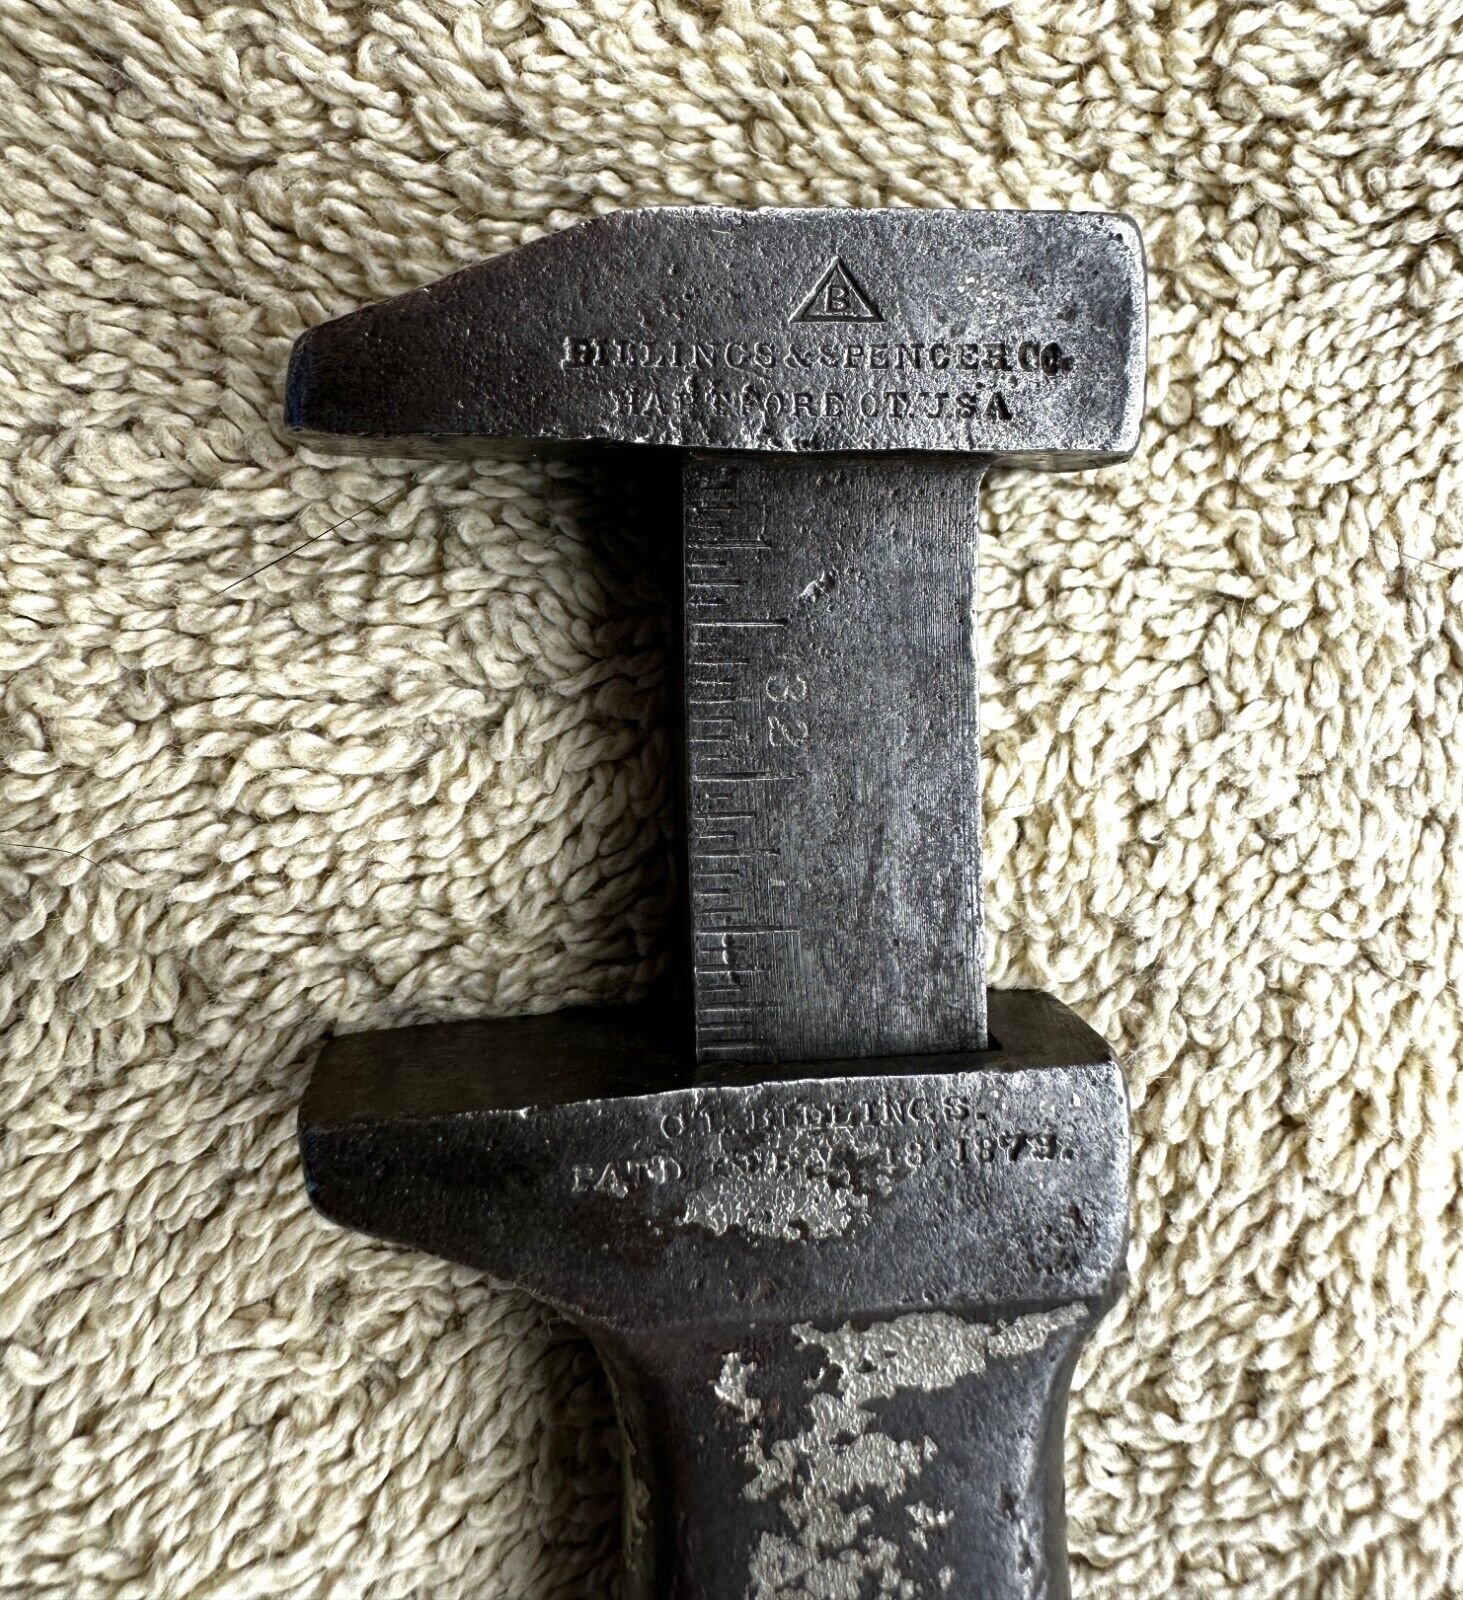 VINTAGE BILLINGS & SPENCER CO. BICYCLE WRENCH